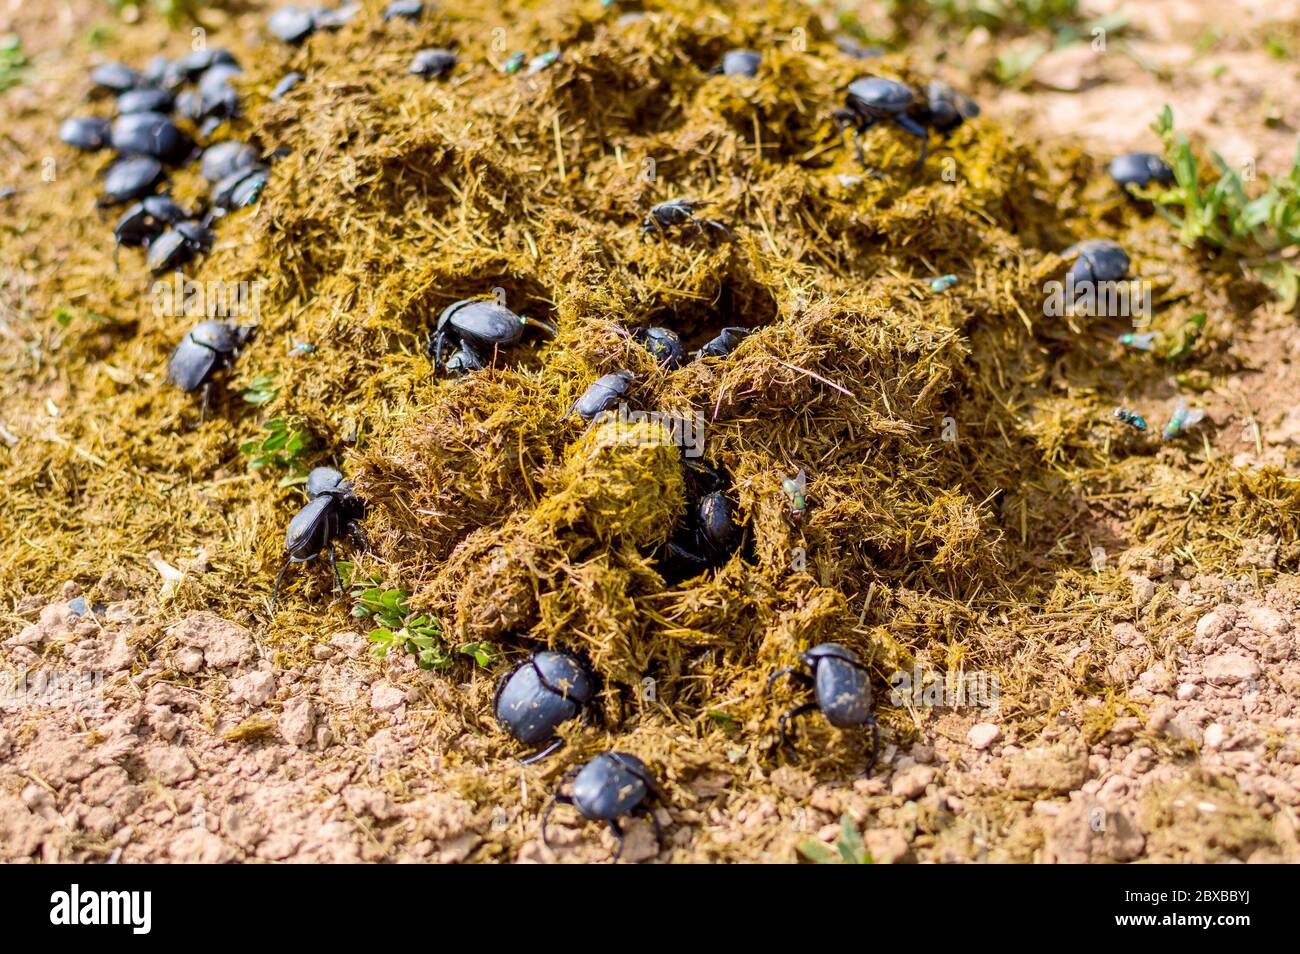 Group of Scarabaeus sacer of Sacred Scarab in dung. Stock Photo